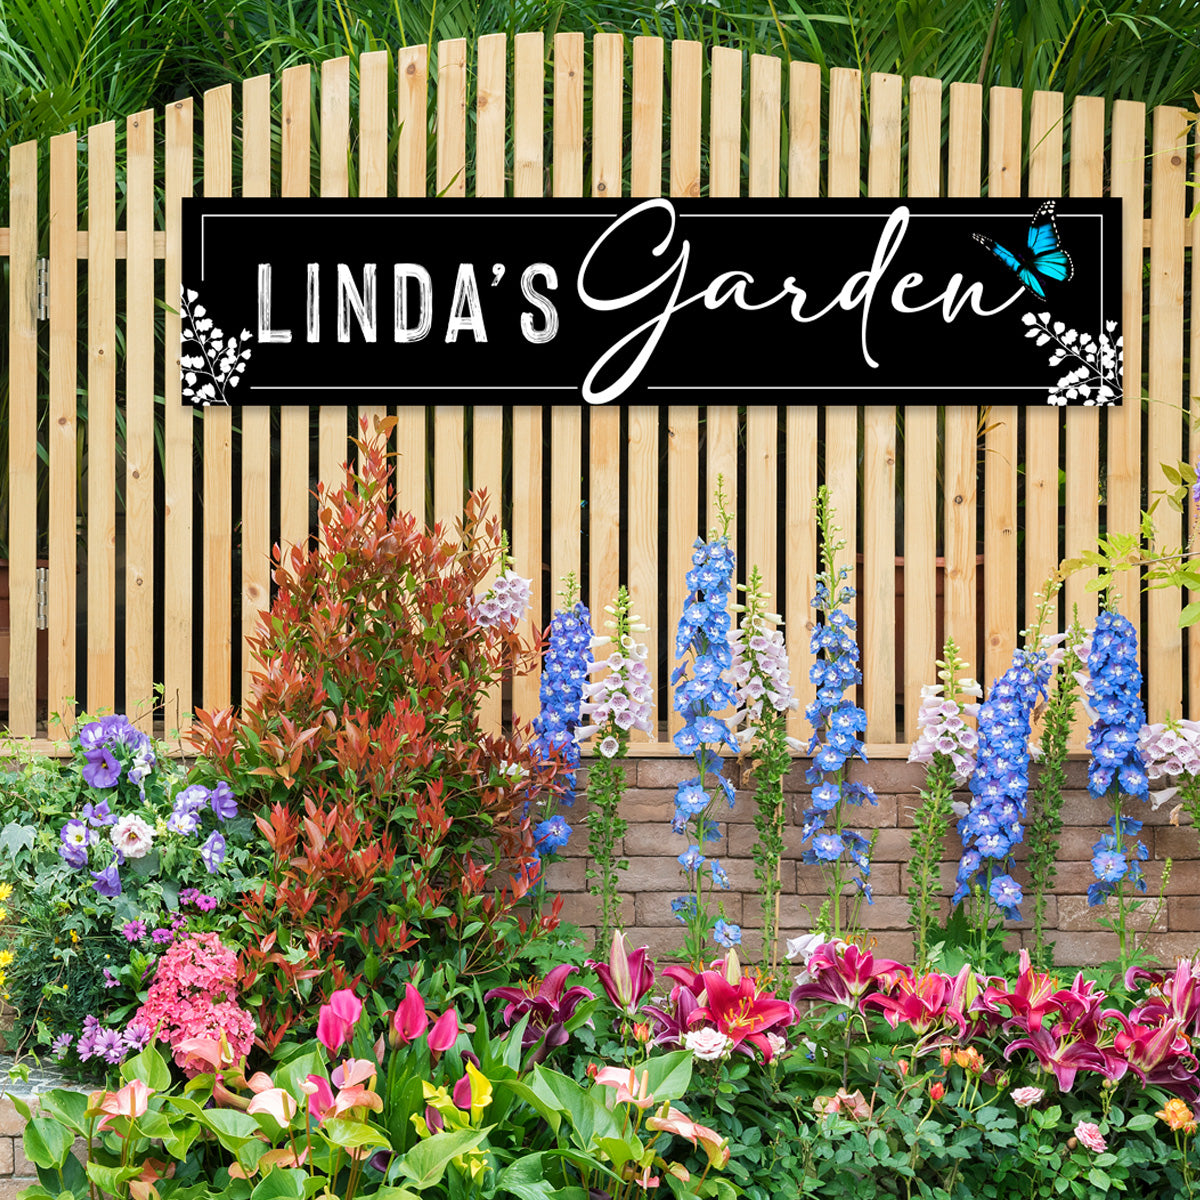 Personalized Metal Garden Signs in black with white lettering and a butterfly.